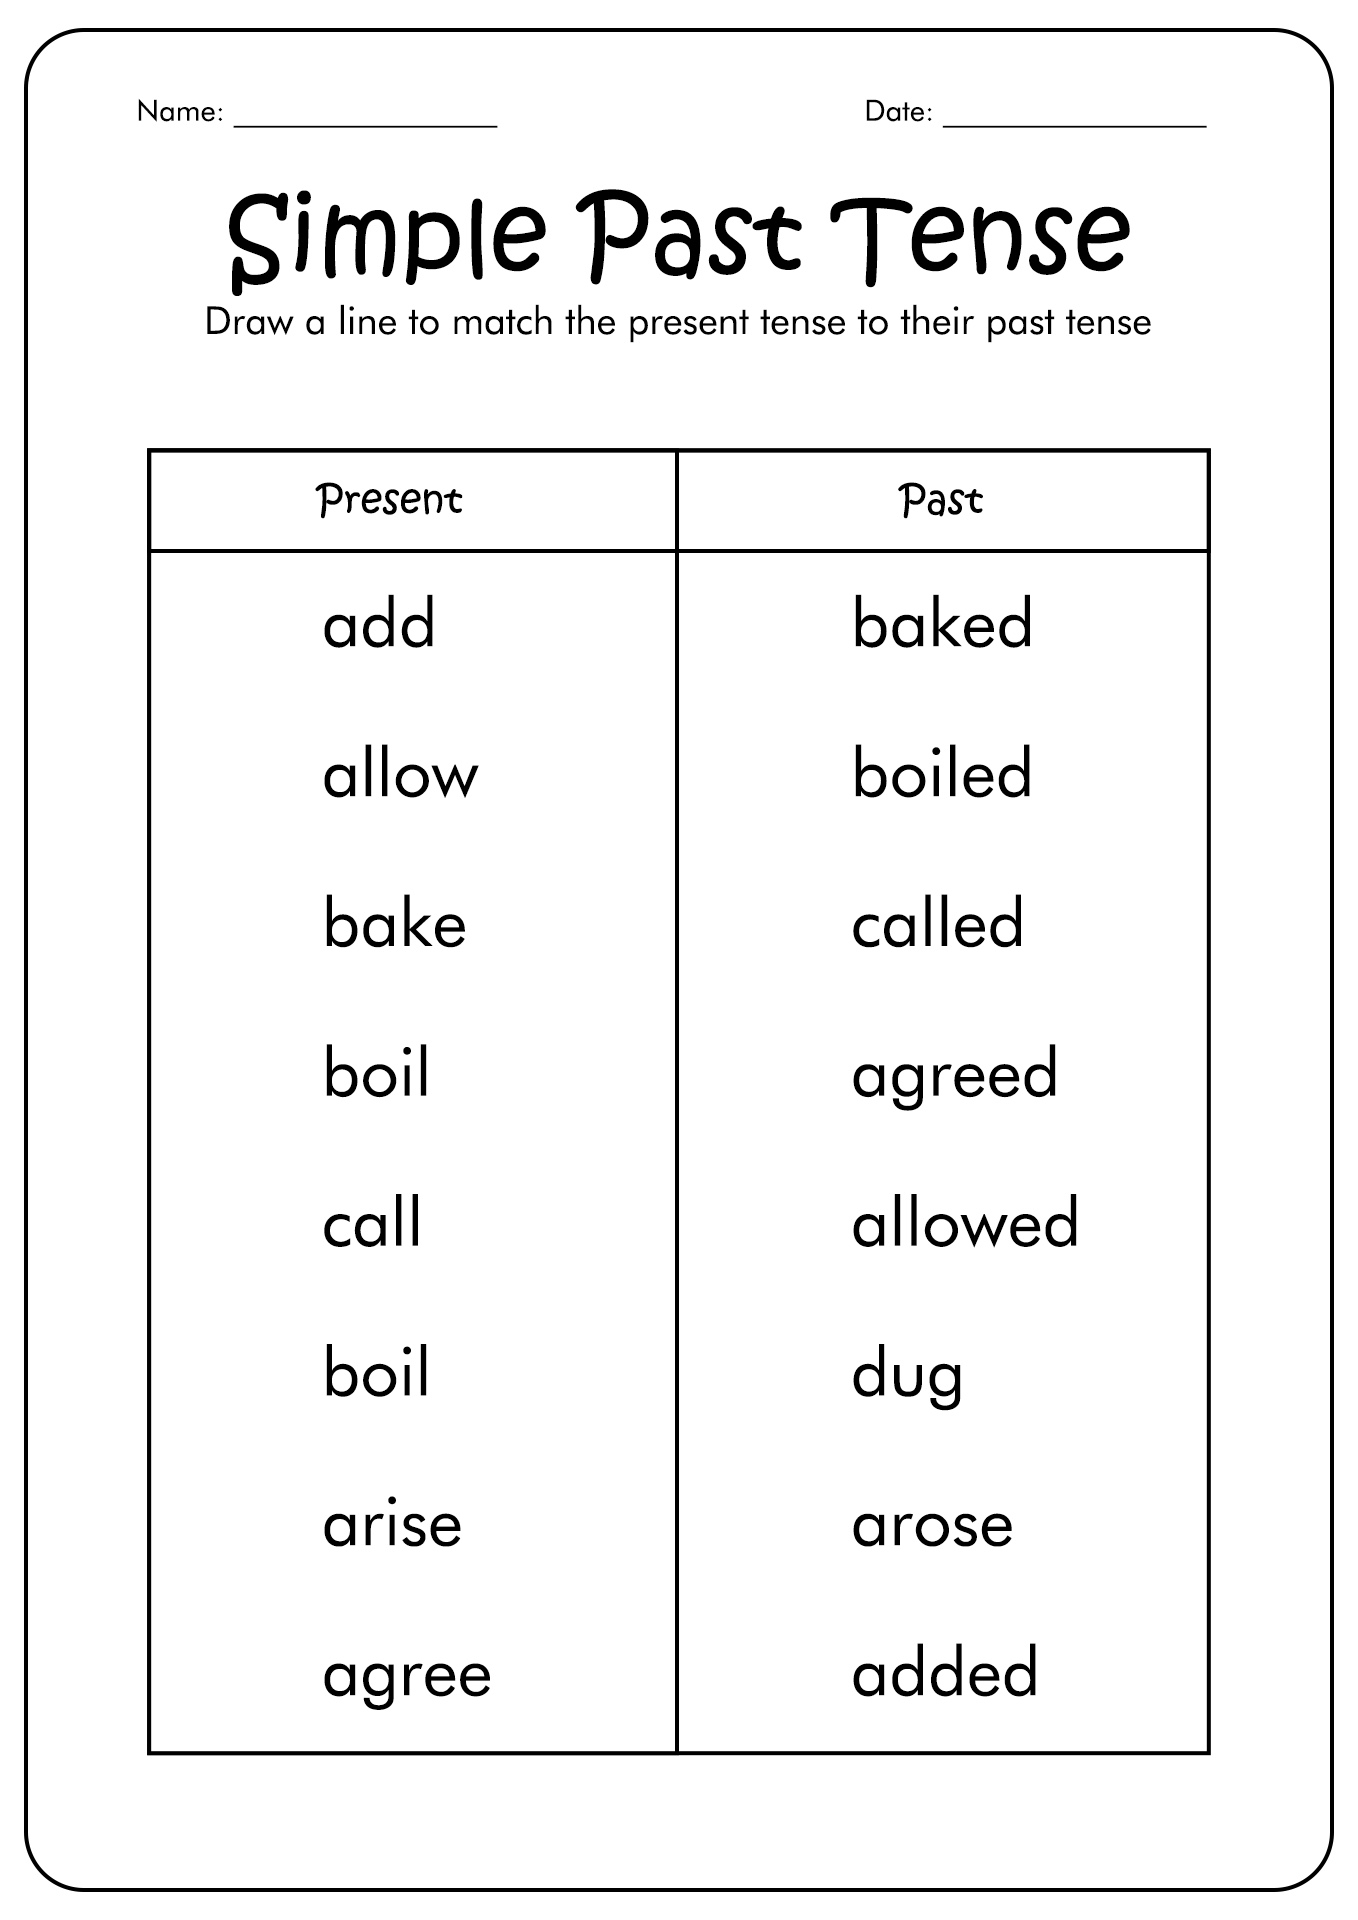 fables-for-practising-past-tense-esl-worksheet-by-tz-ione